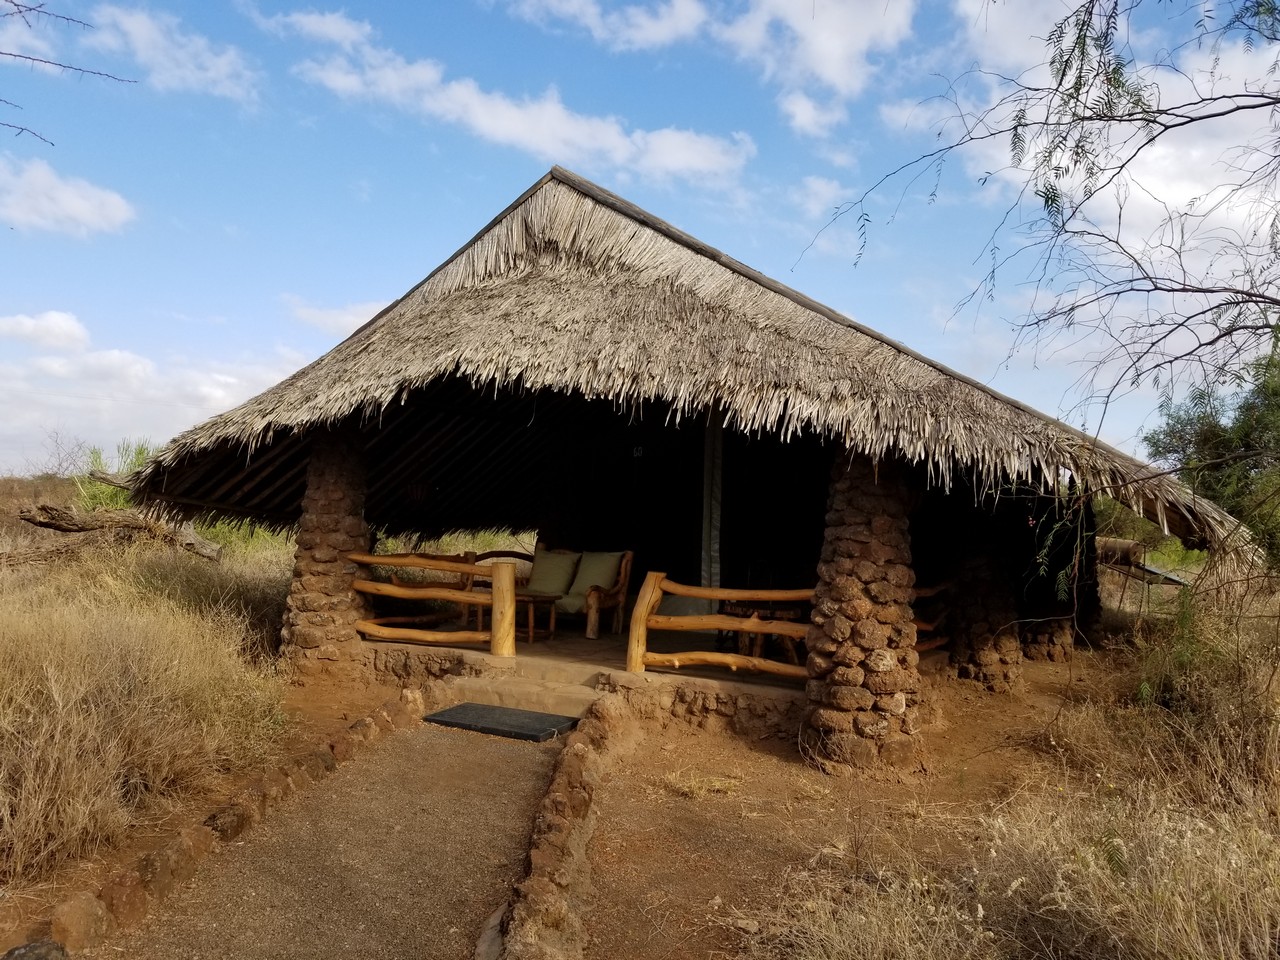 a hut with a thatched roof